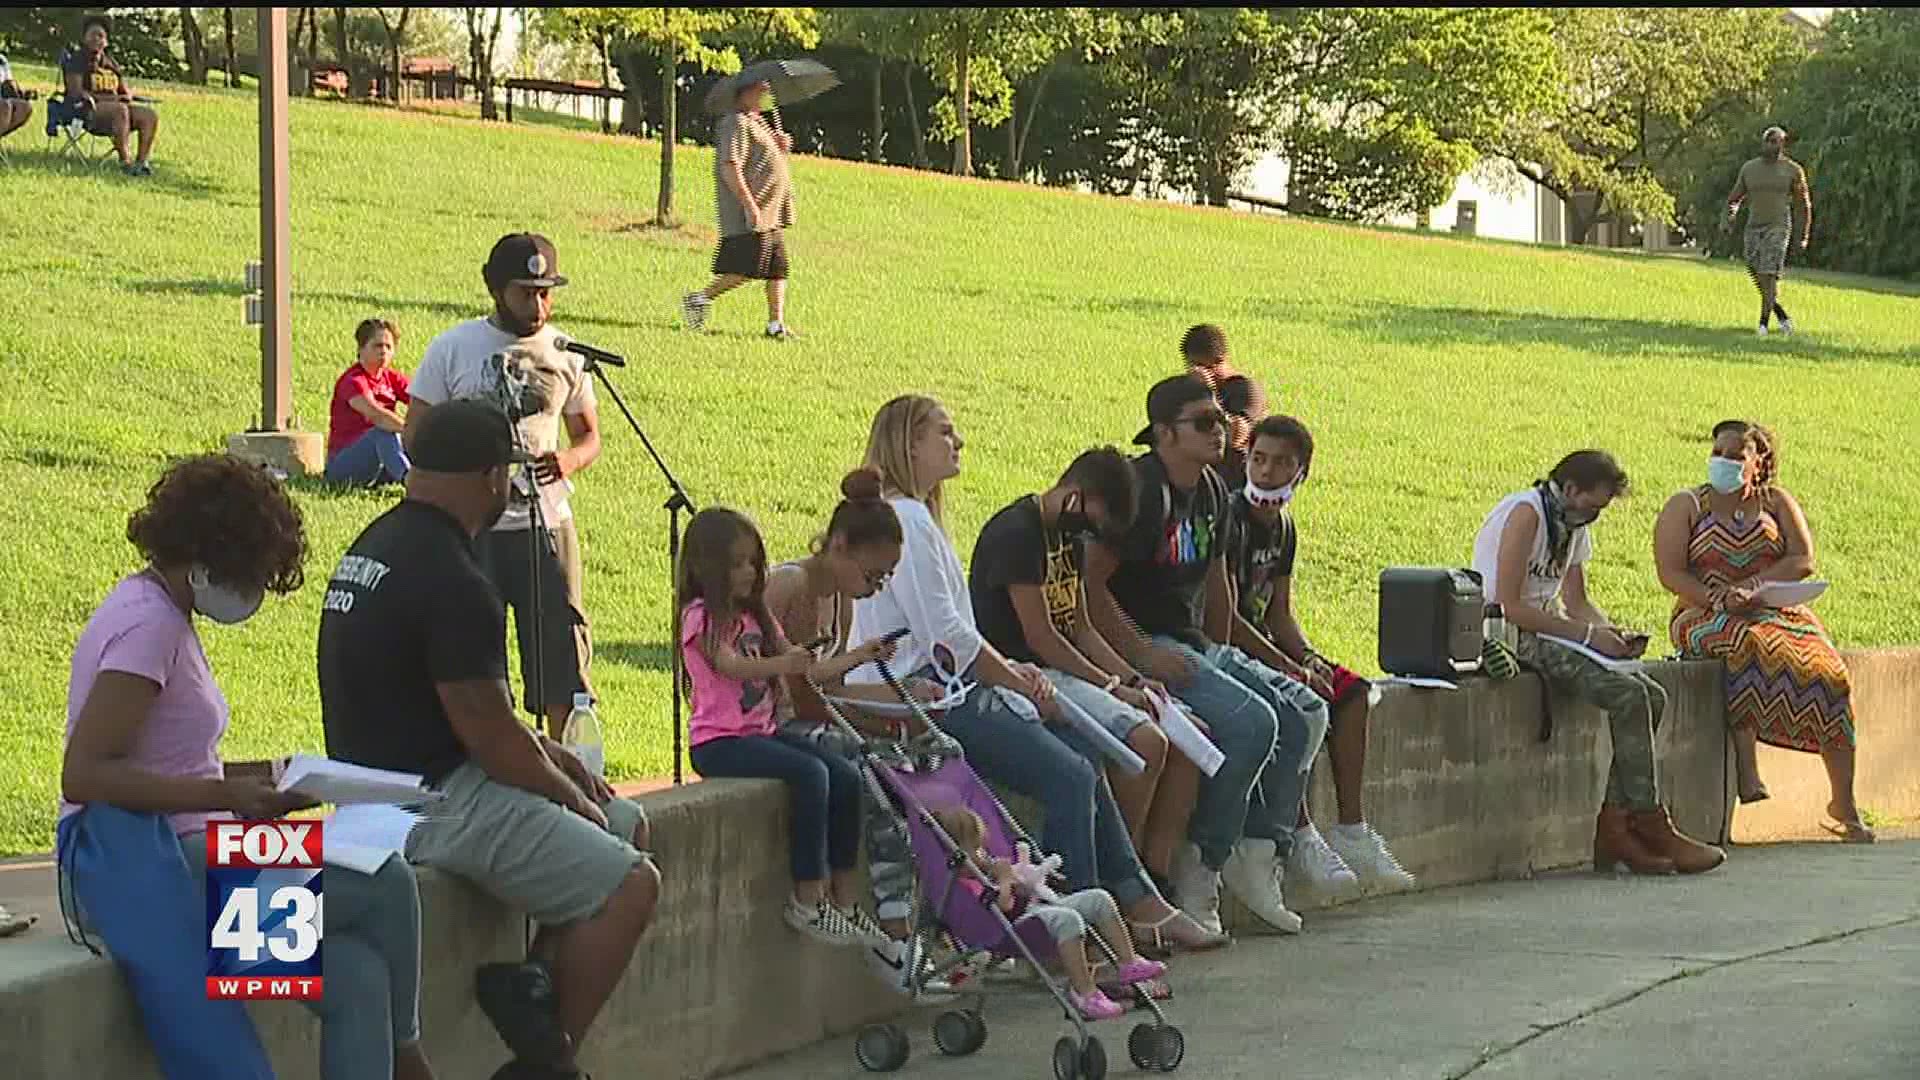 Harrisburg City Council held its third public comment session at Reservoir Park on Aug. 18 for a bill meant to further police reform.